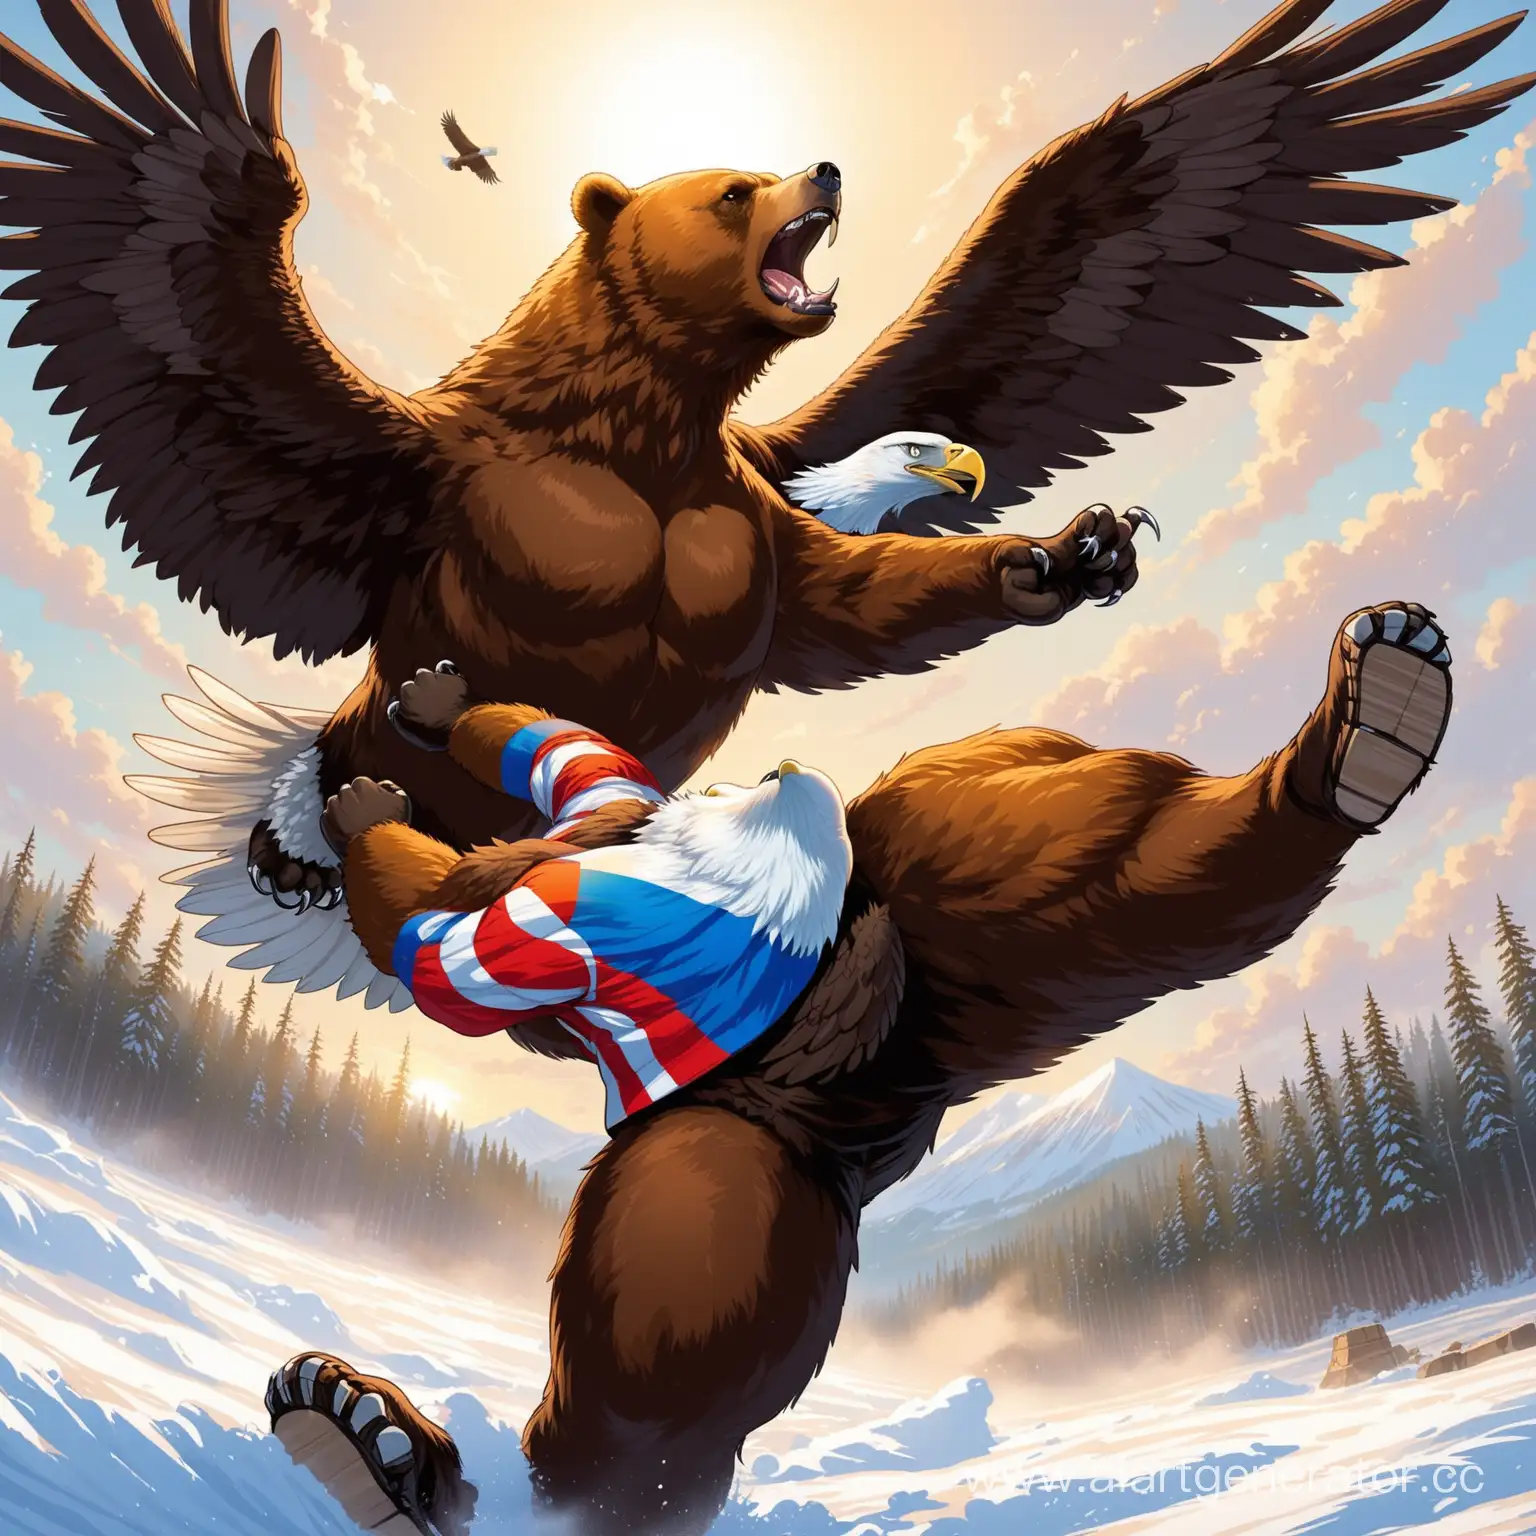 Russian-Bear-Triumphs-Over-American-Eagle-in-Epic-Battle